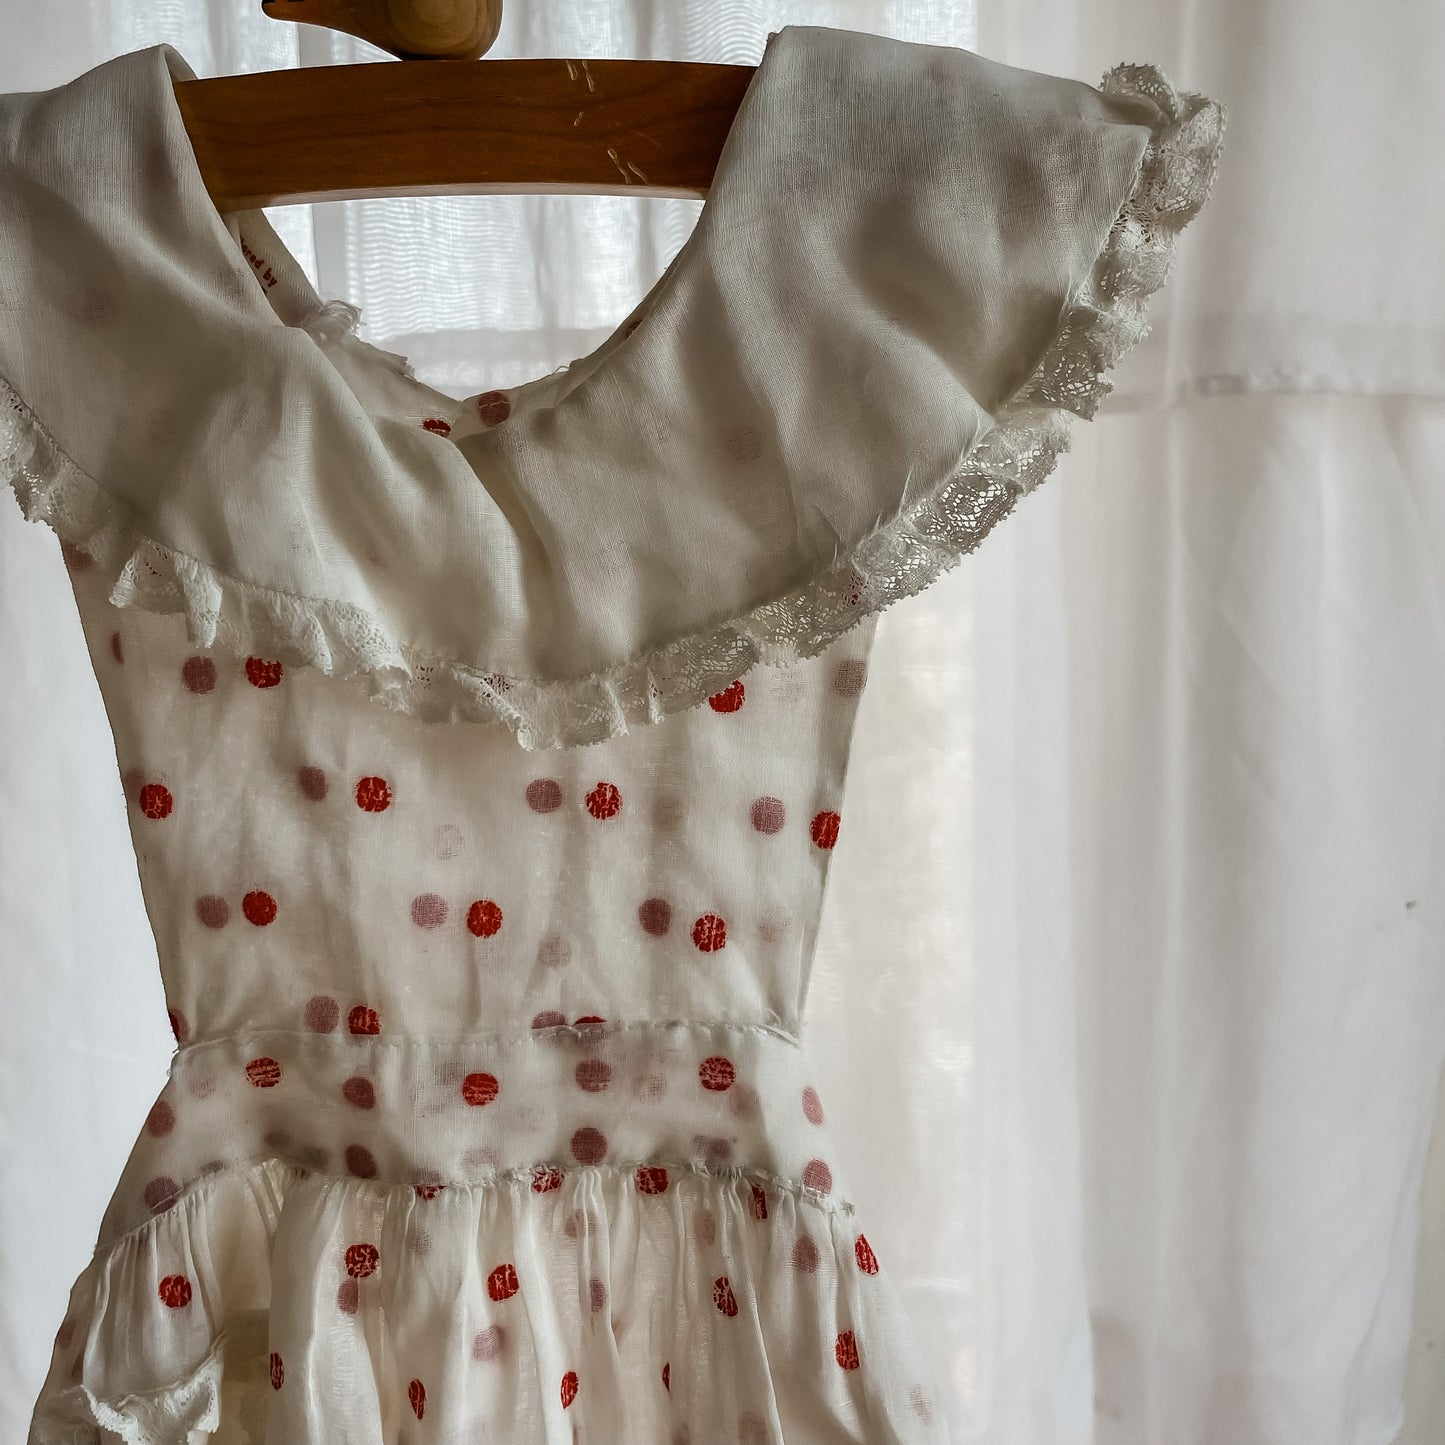 Vintage Sheer Dotted Pinafore — 2/3y